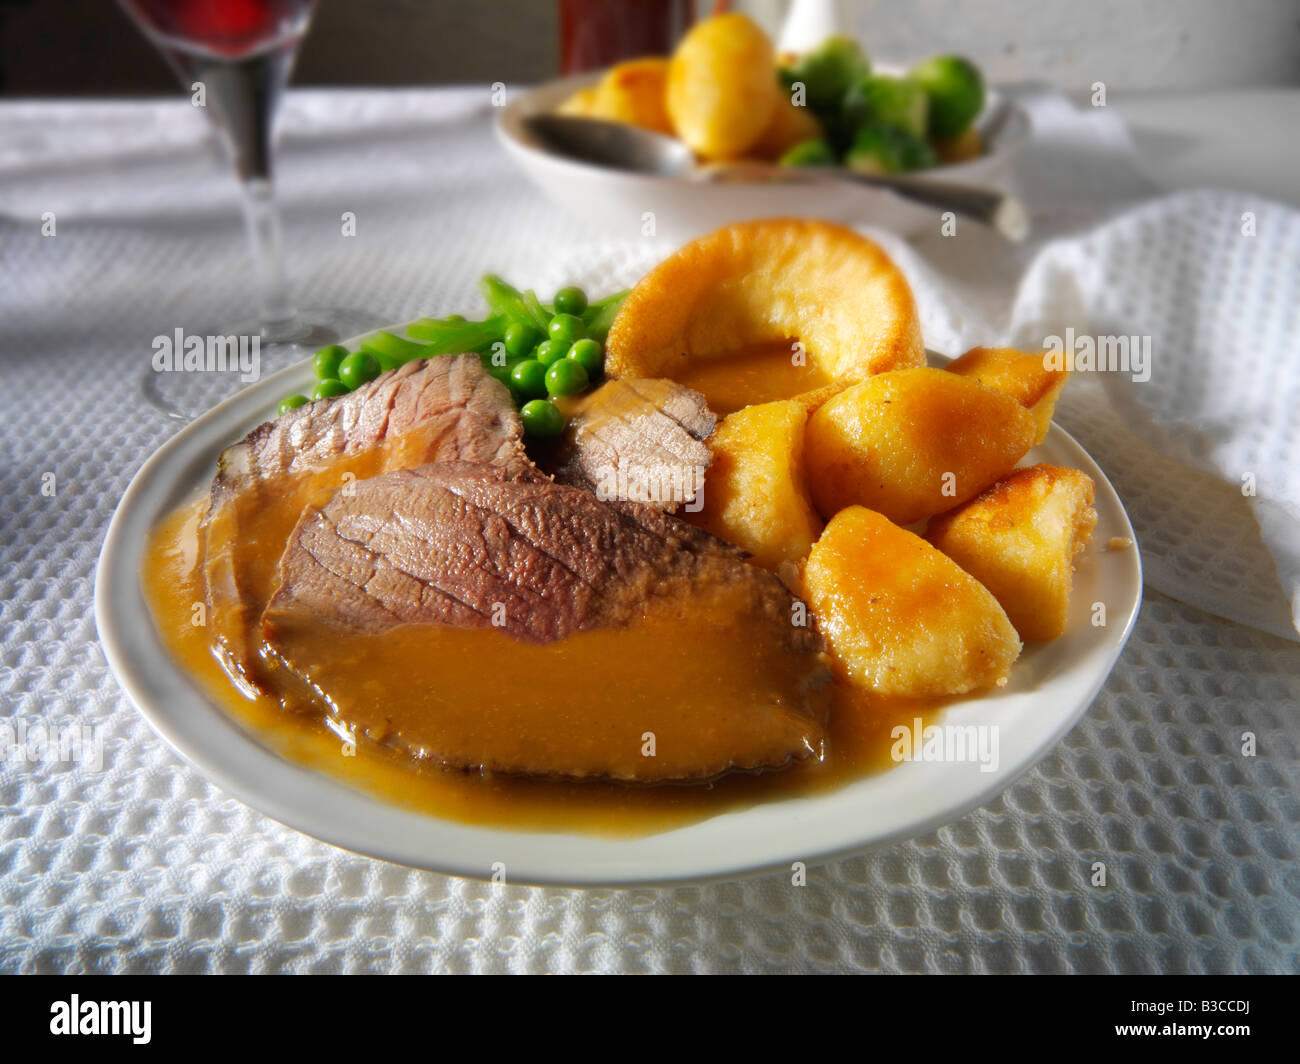 Traditional British roast dinner with roast beef, roast potatoes, yorkshire puddings. 21 days hung Stock Photo